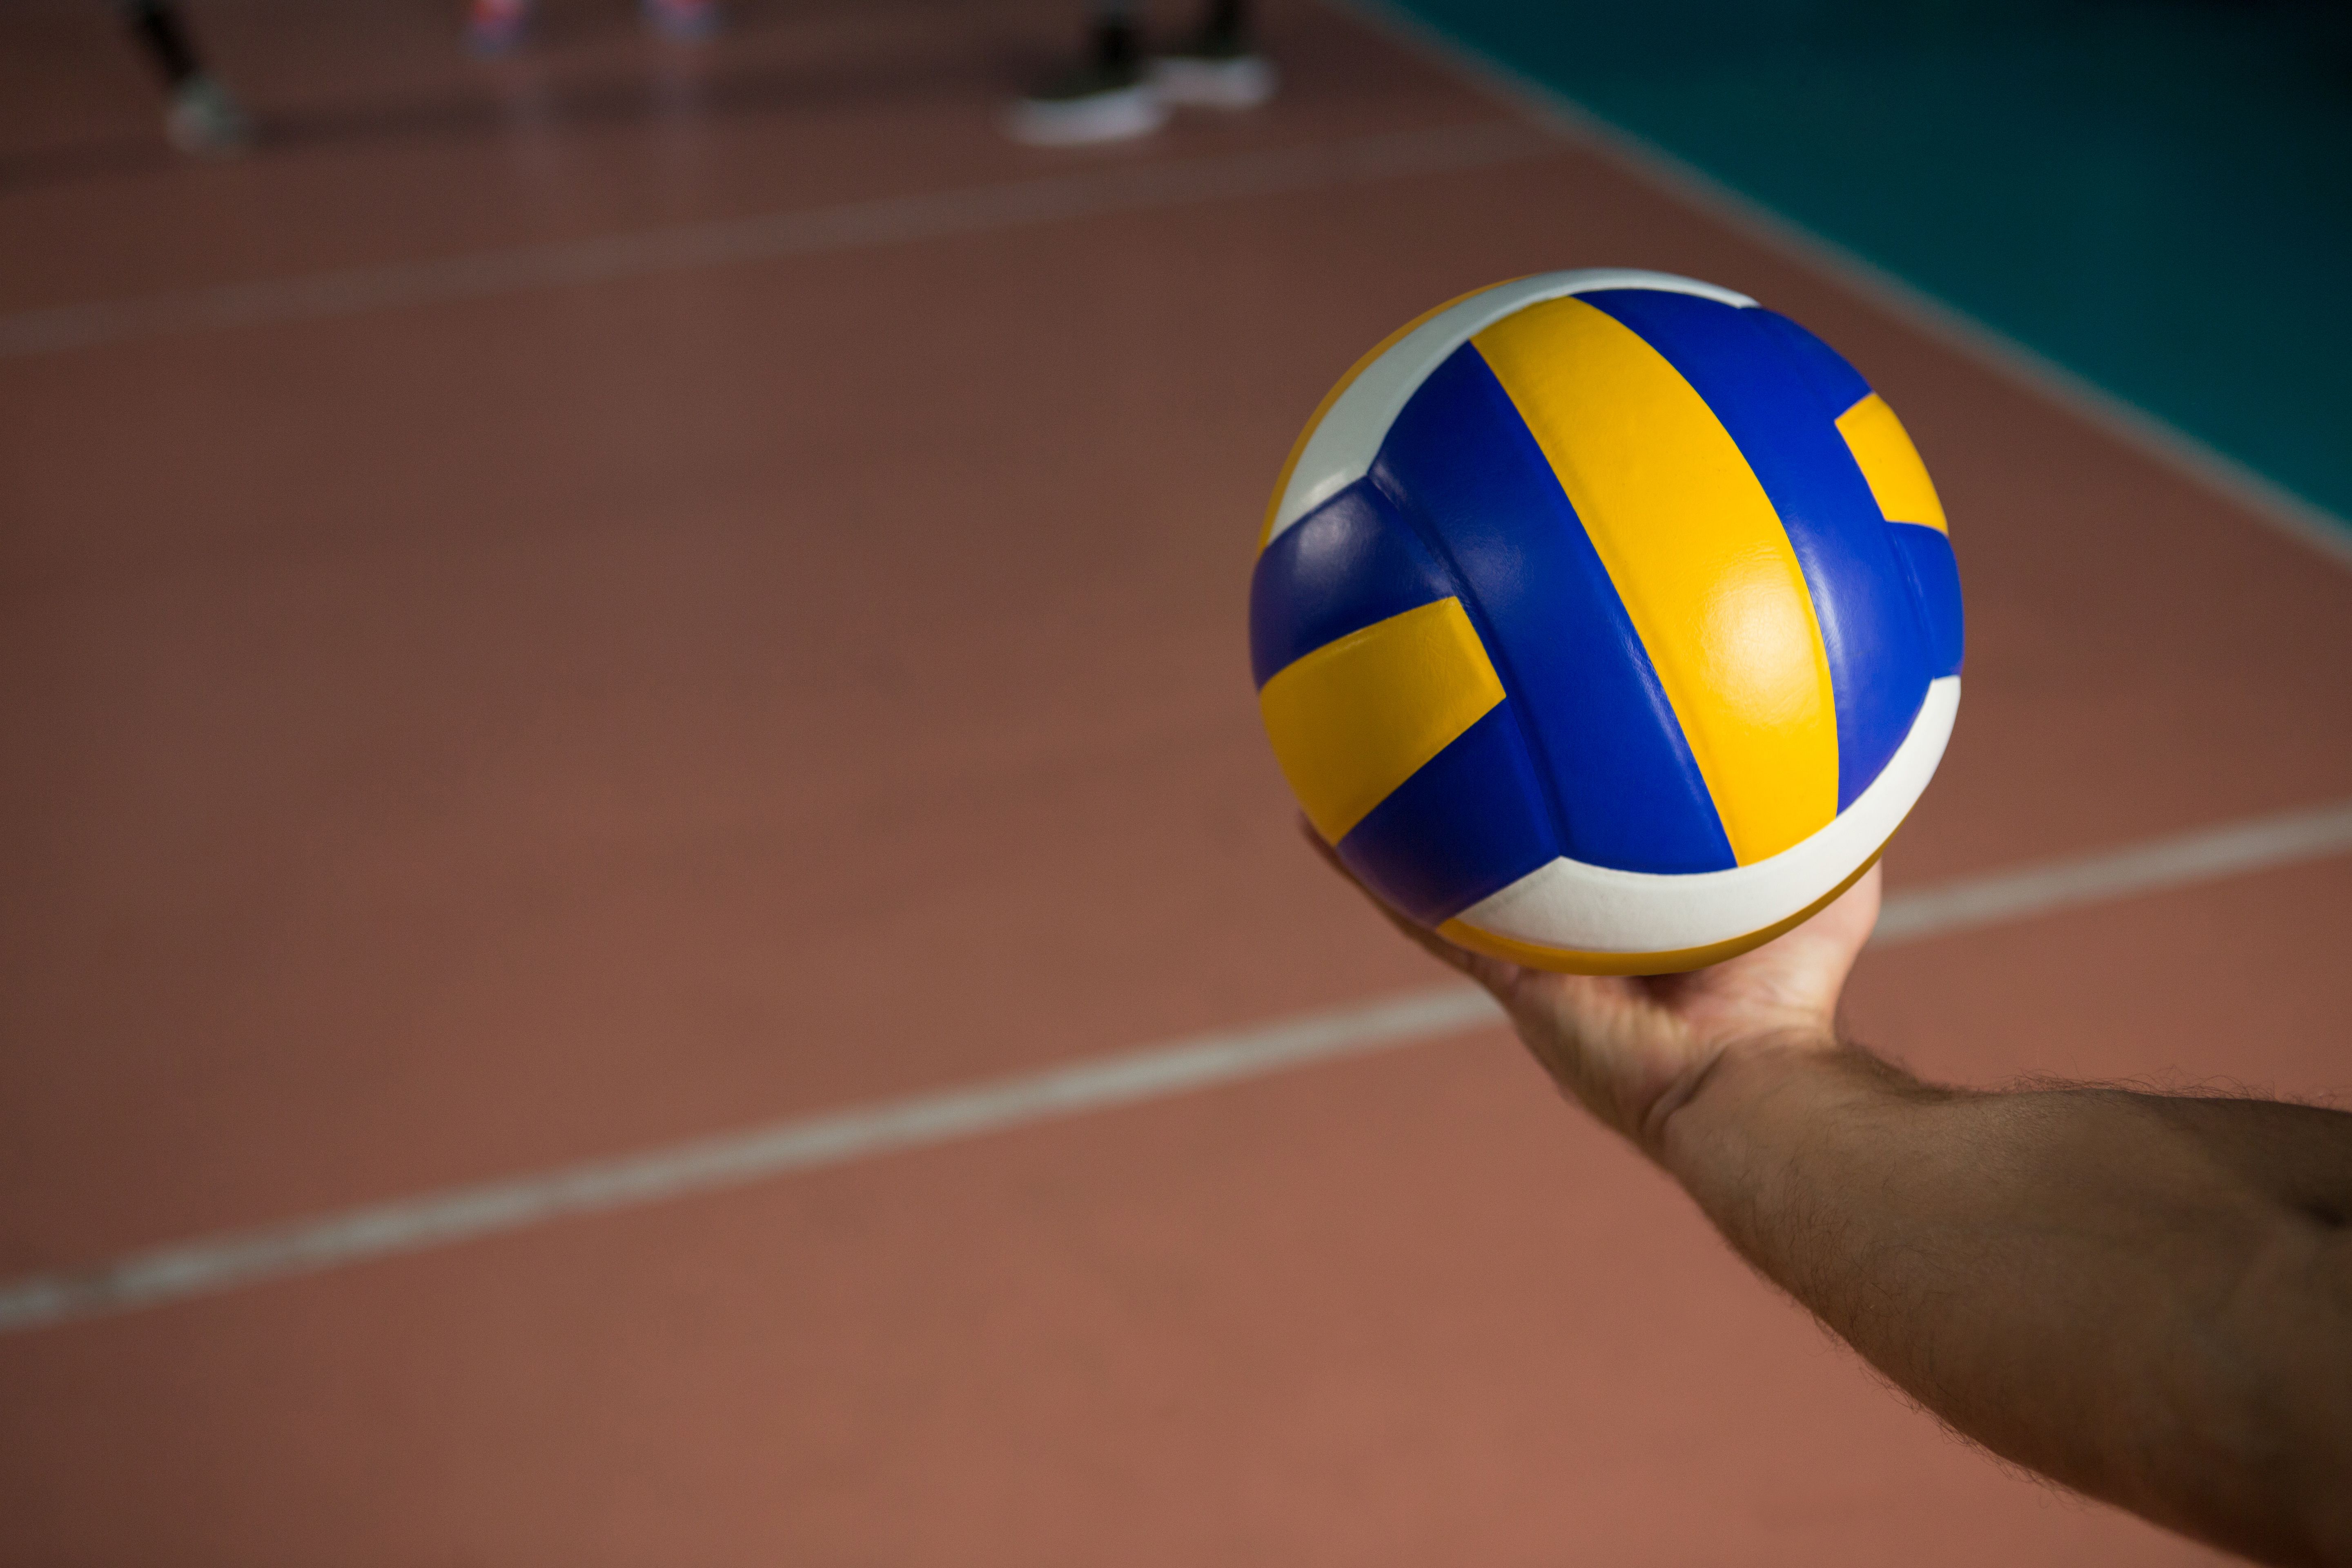 A hand holding up an volleyball ball - Volleyball